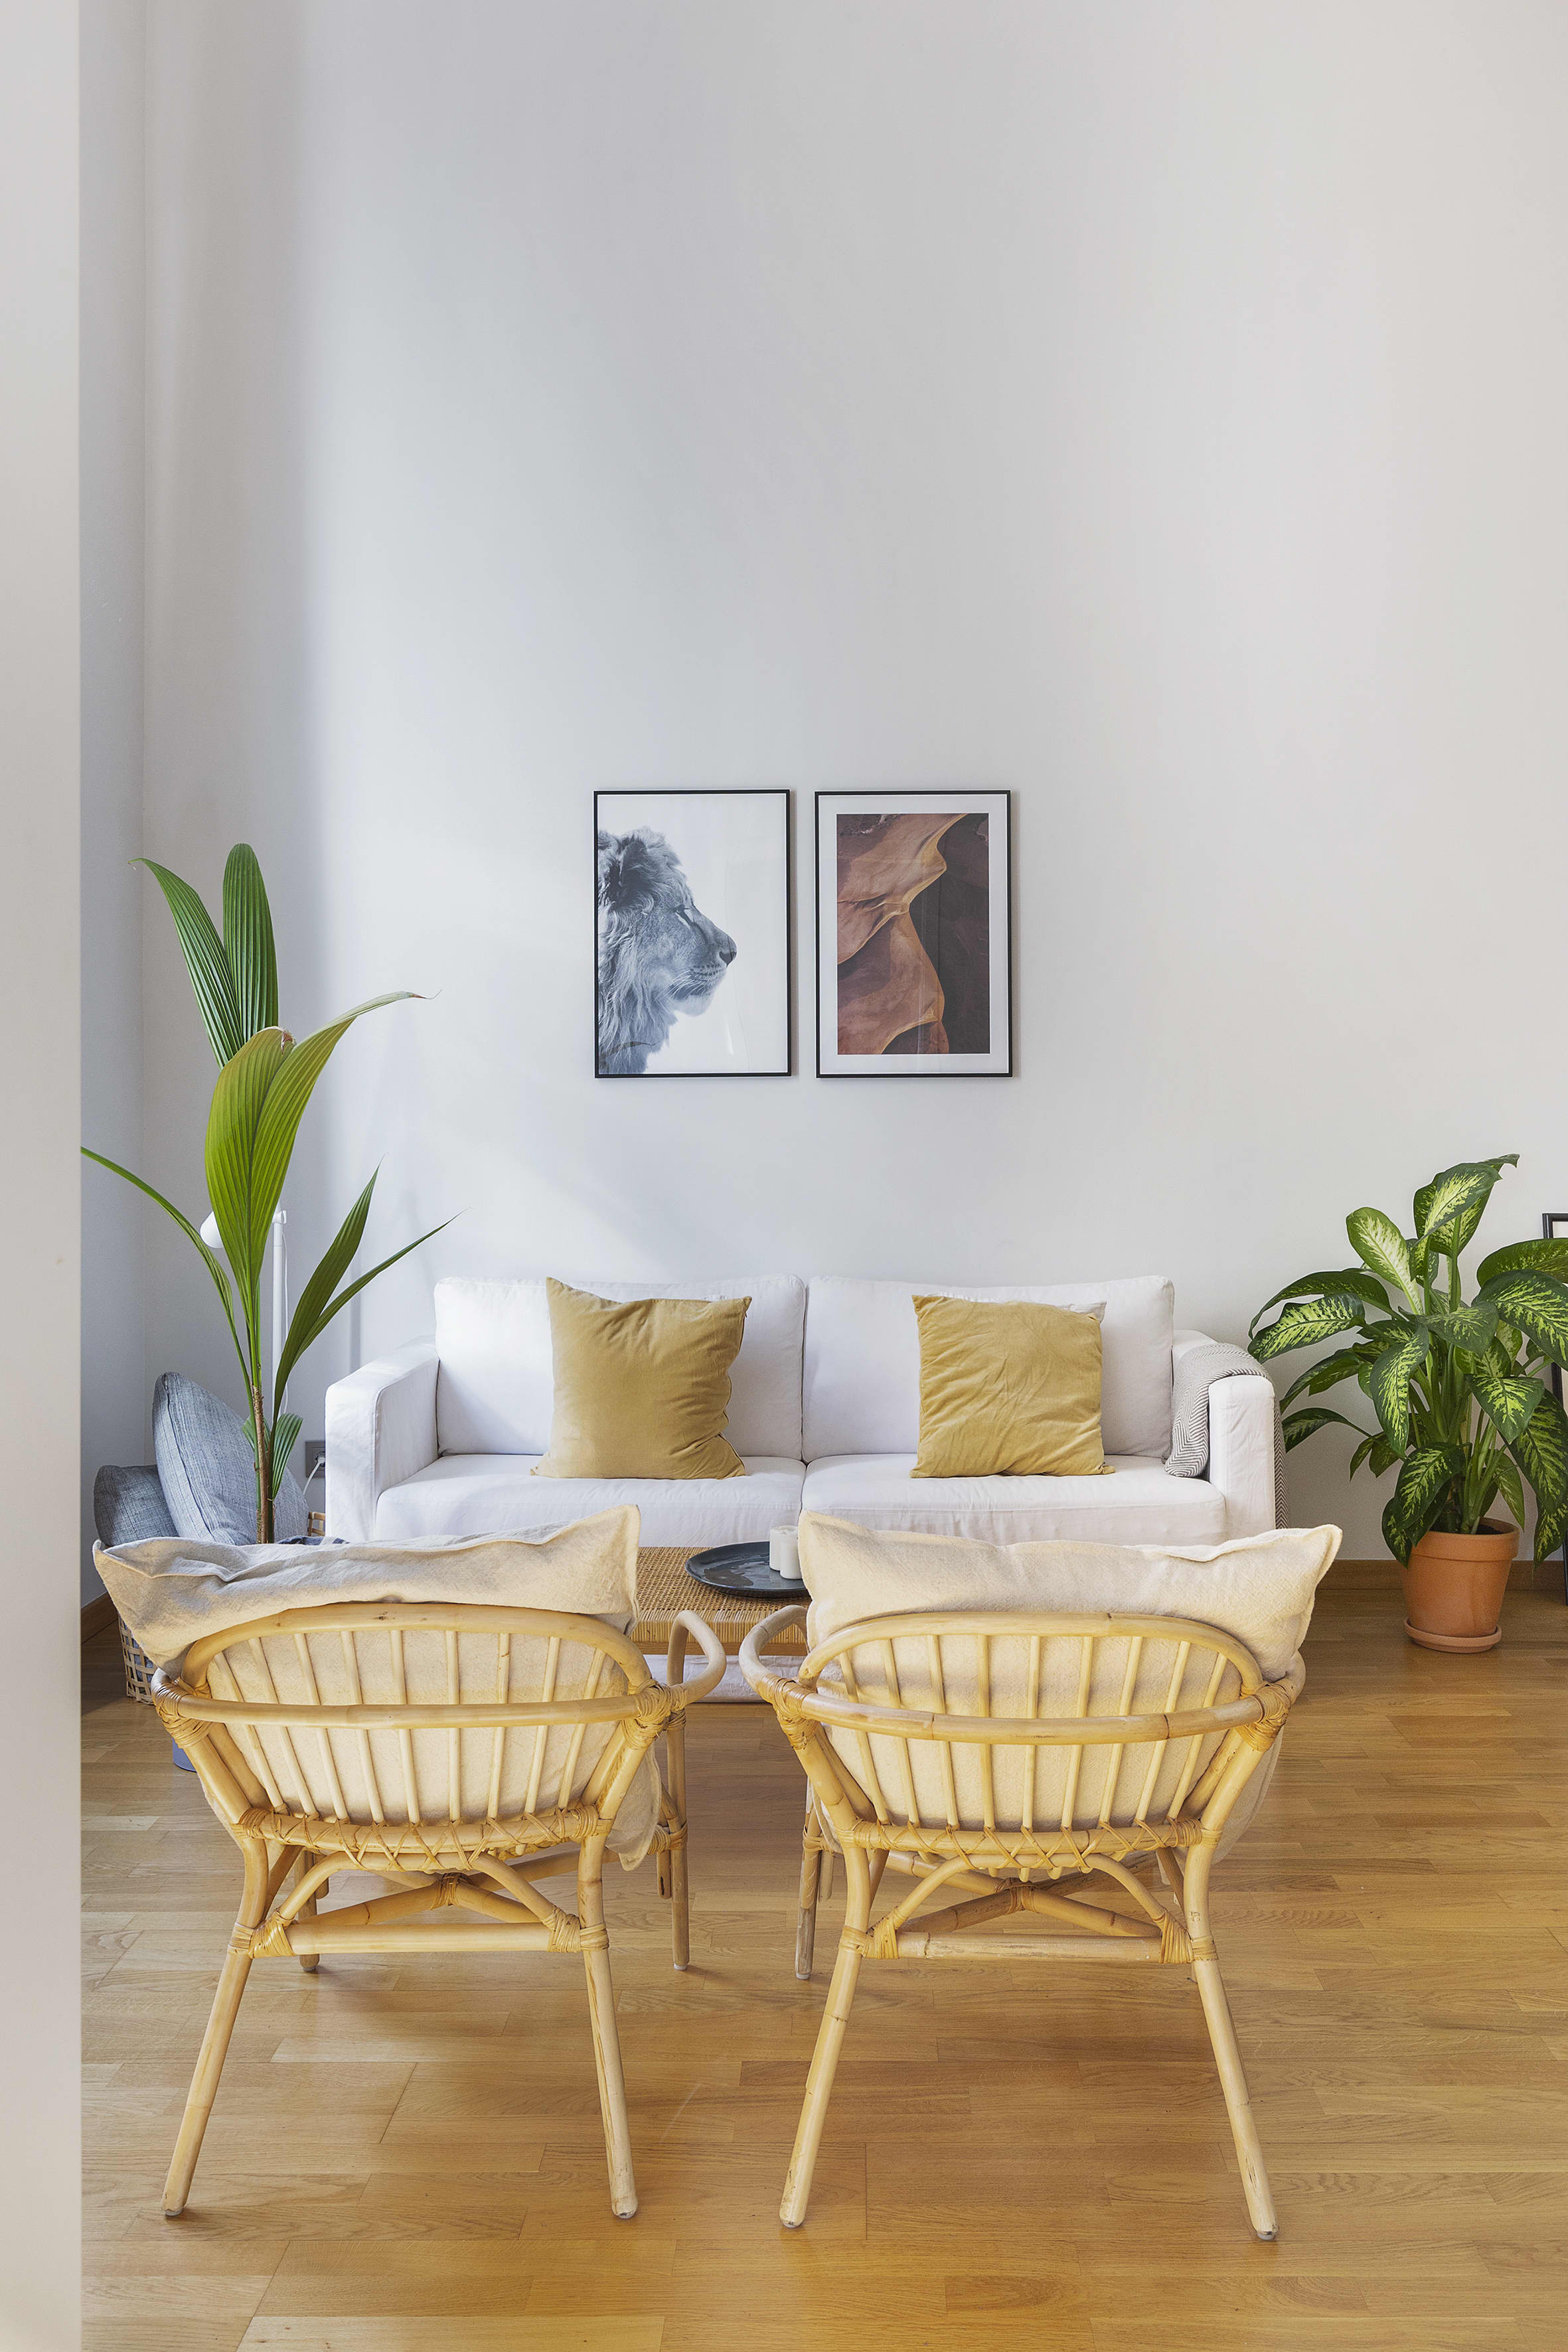 Ikea Filled Barcelona House Tour Photos Apartment Therapy